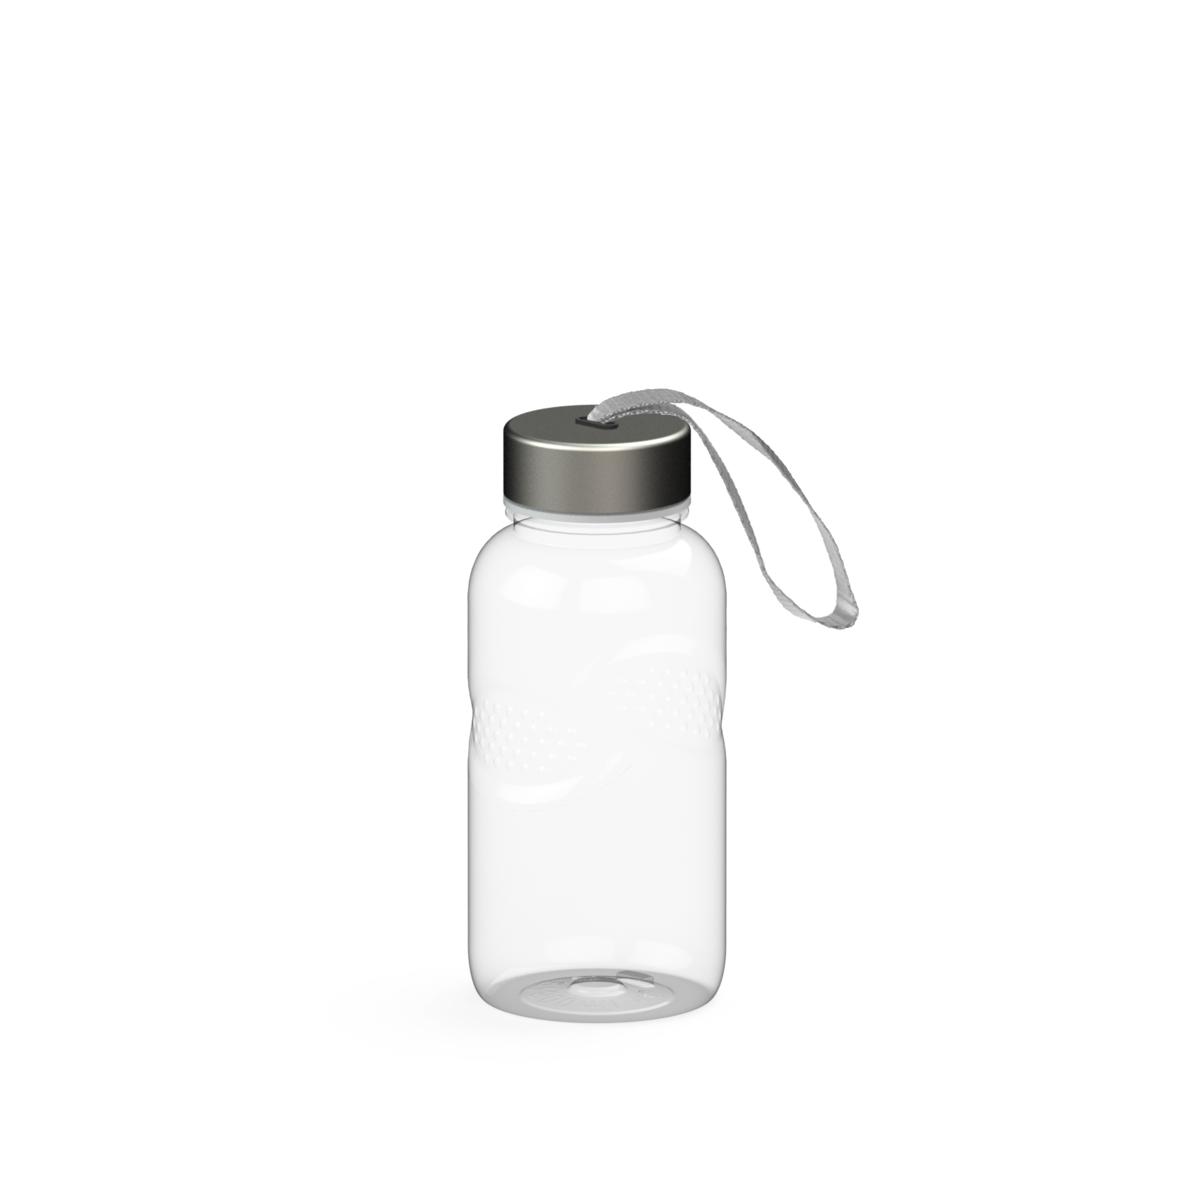 This is a drink bottle originating from Little Horwood that has a neutral taste. - Sandford Orcas